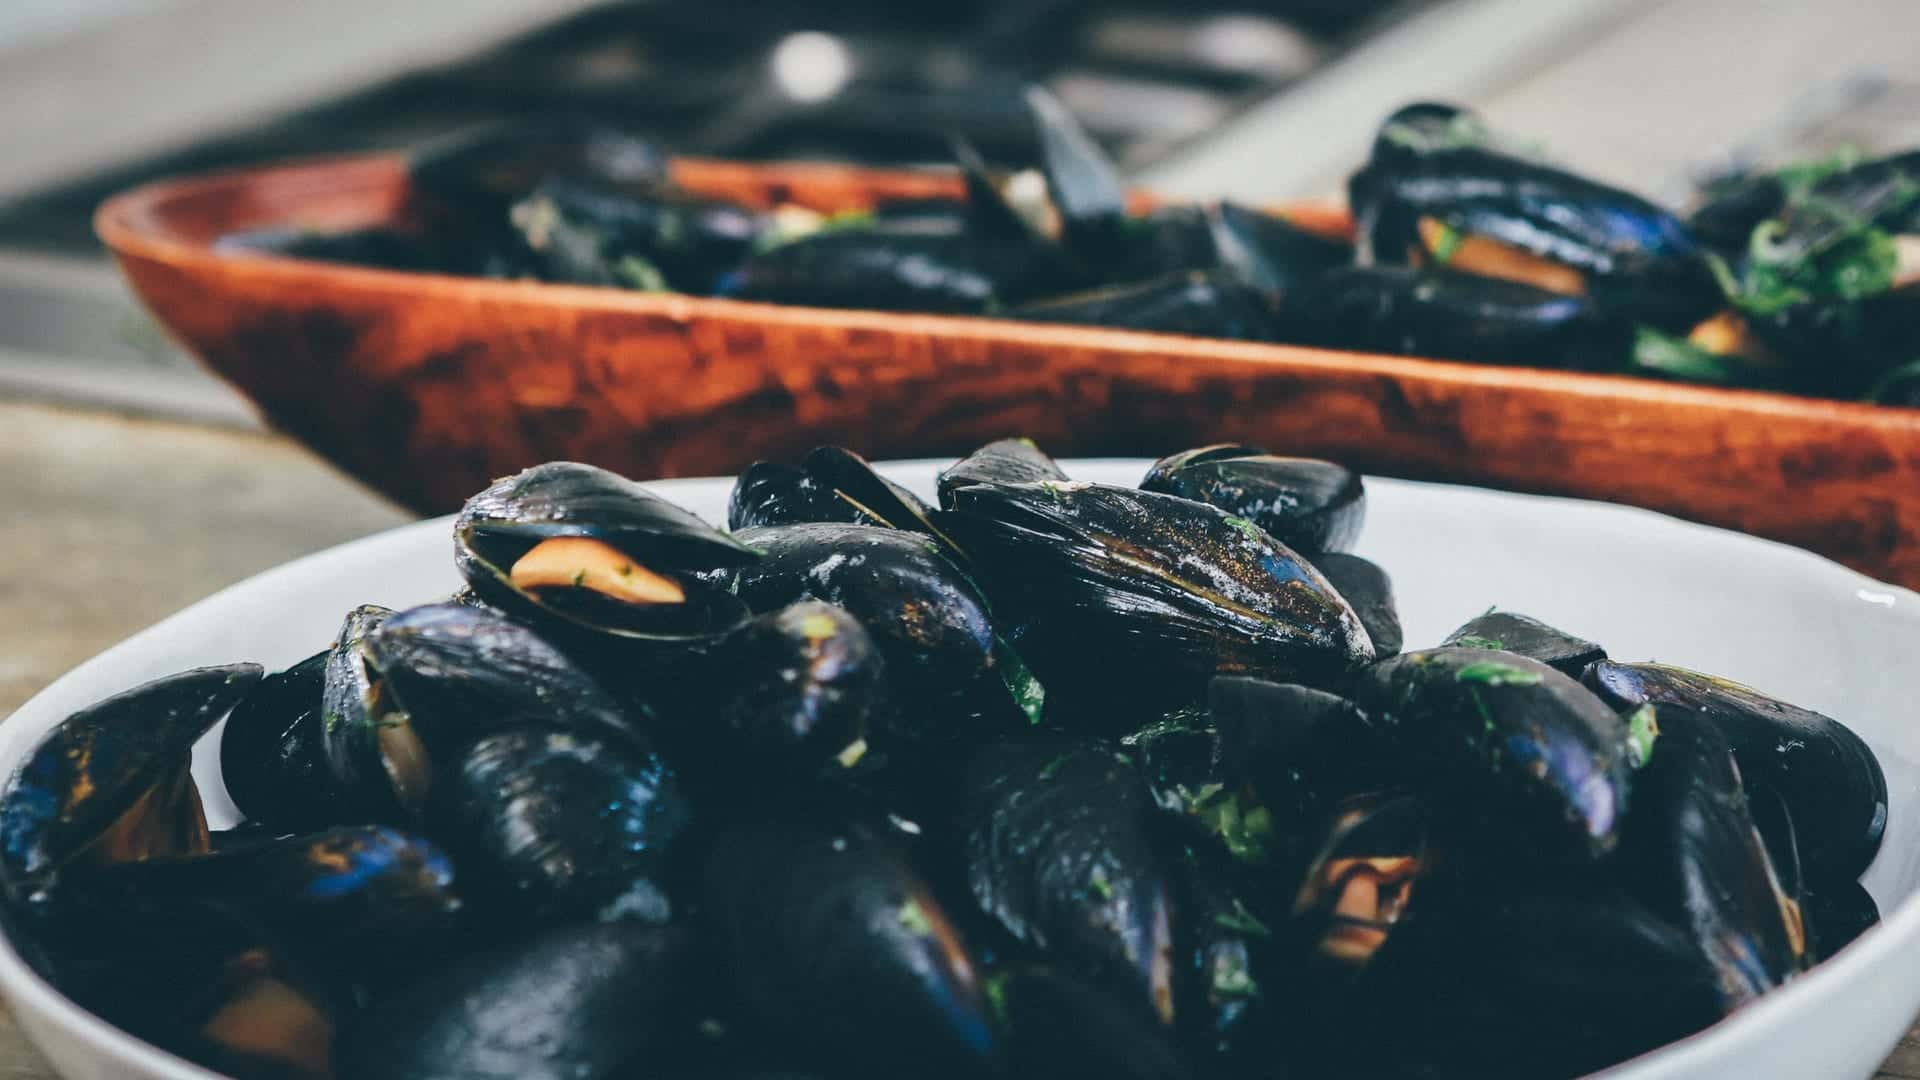 Mussels: The Sustainable Choice